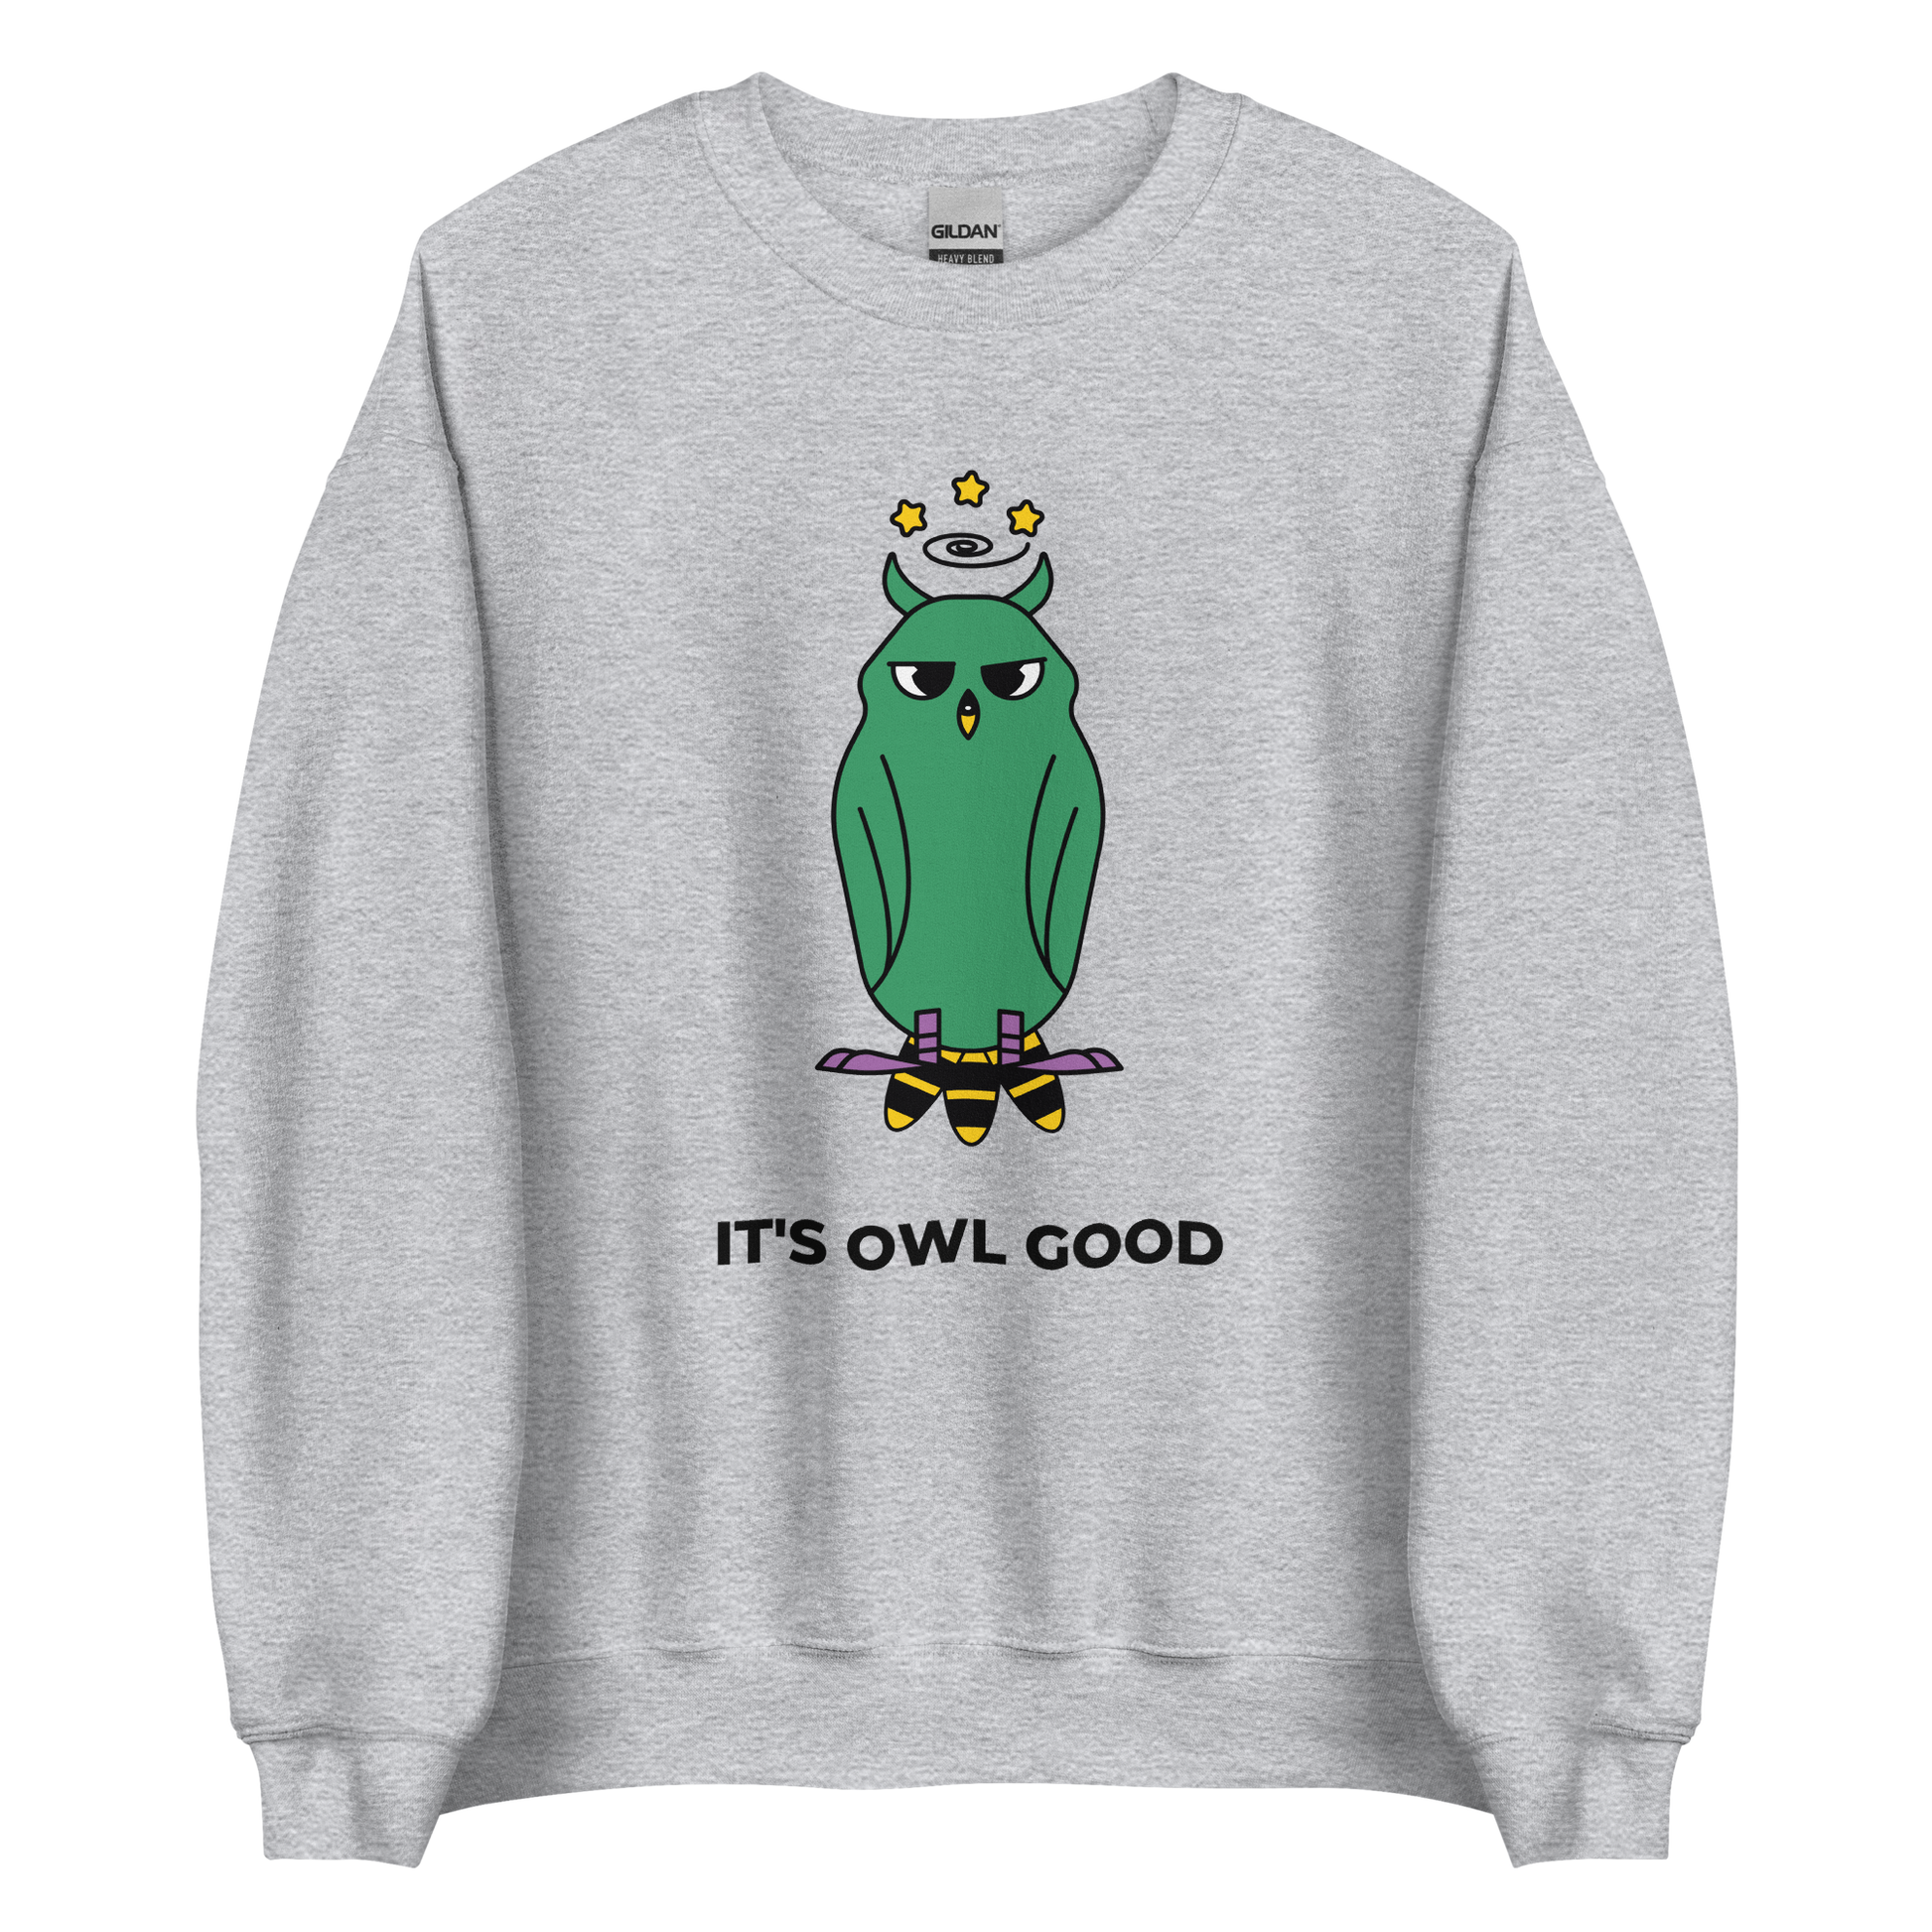 Sport Grey Owl Sweatshirt featuring a captivating It's Owl Good graphic on the chest - Funny Graphic Owl Sweatshirts - Boozy Fox